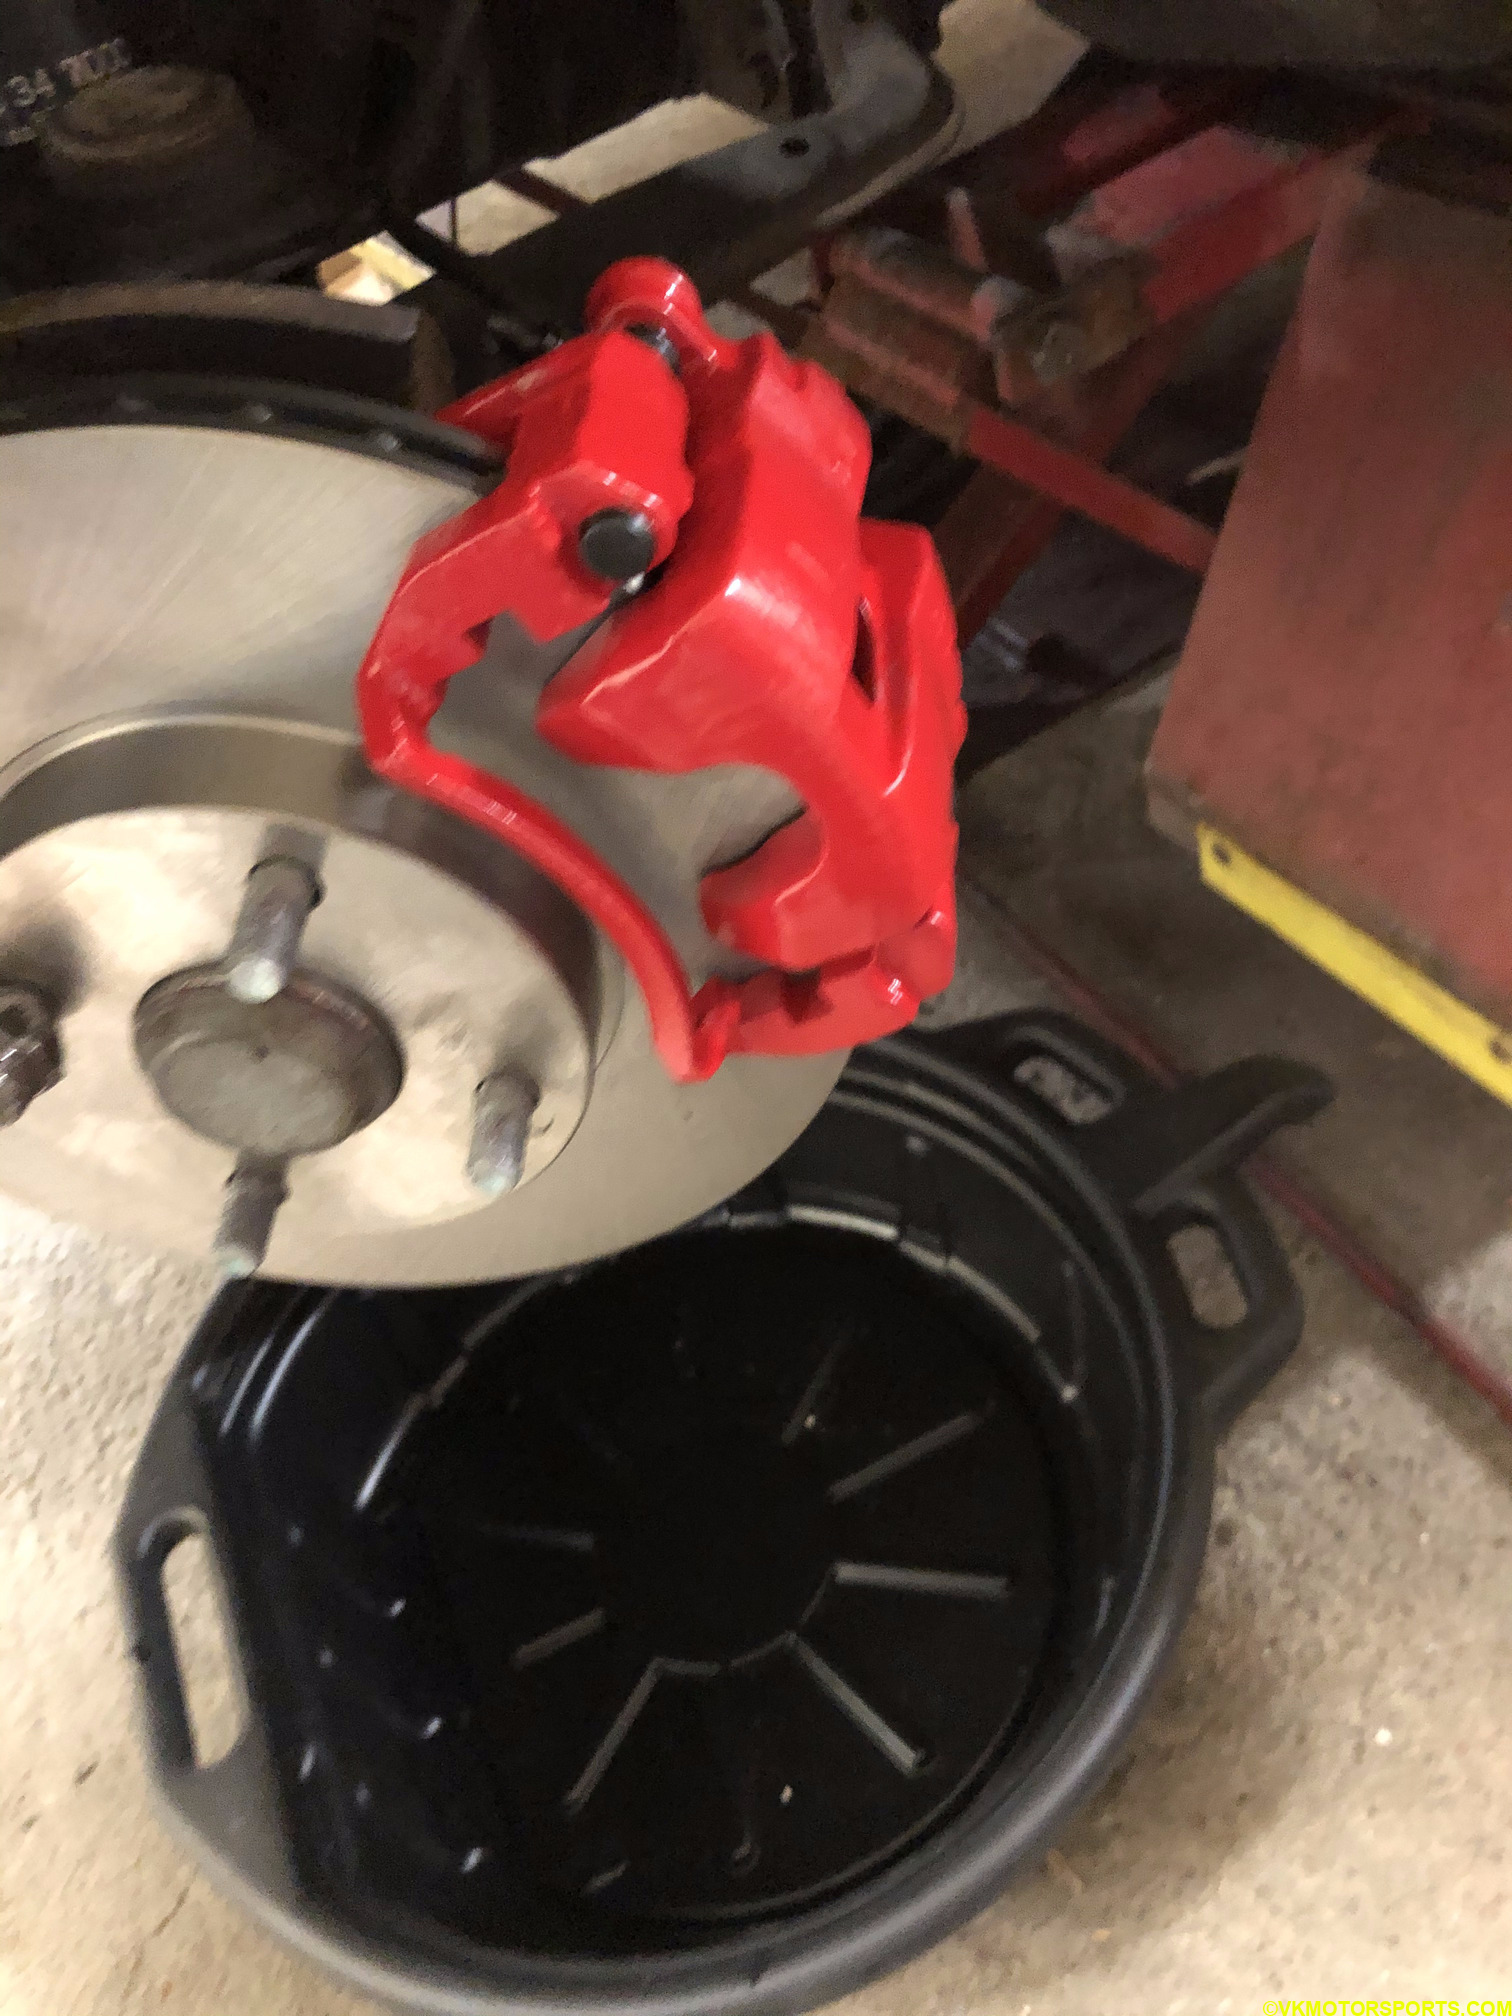 Place container below rotor to catch overflowing brake fluid